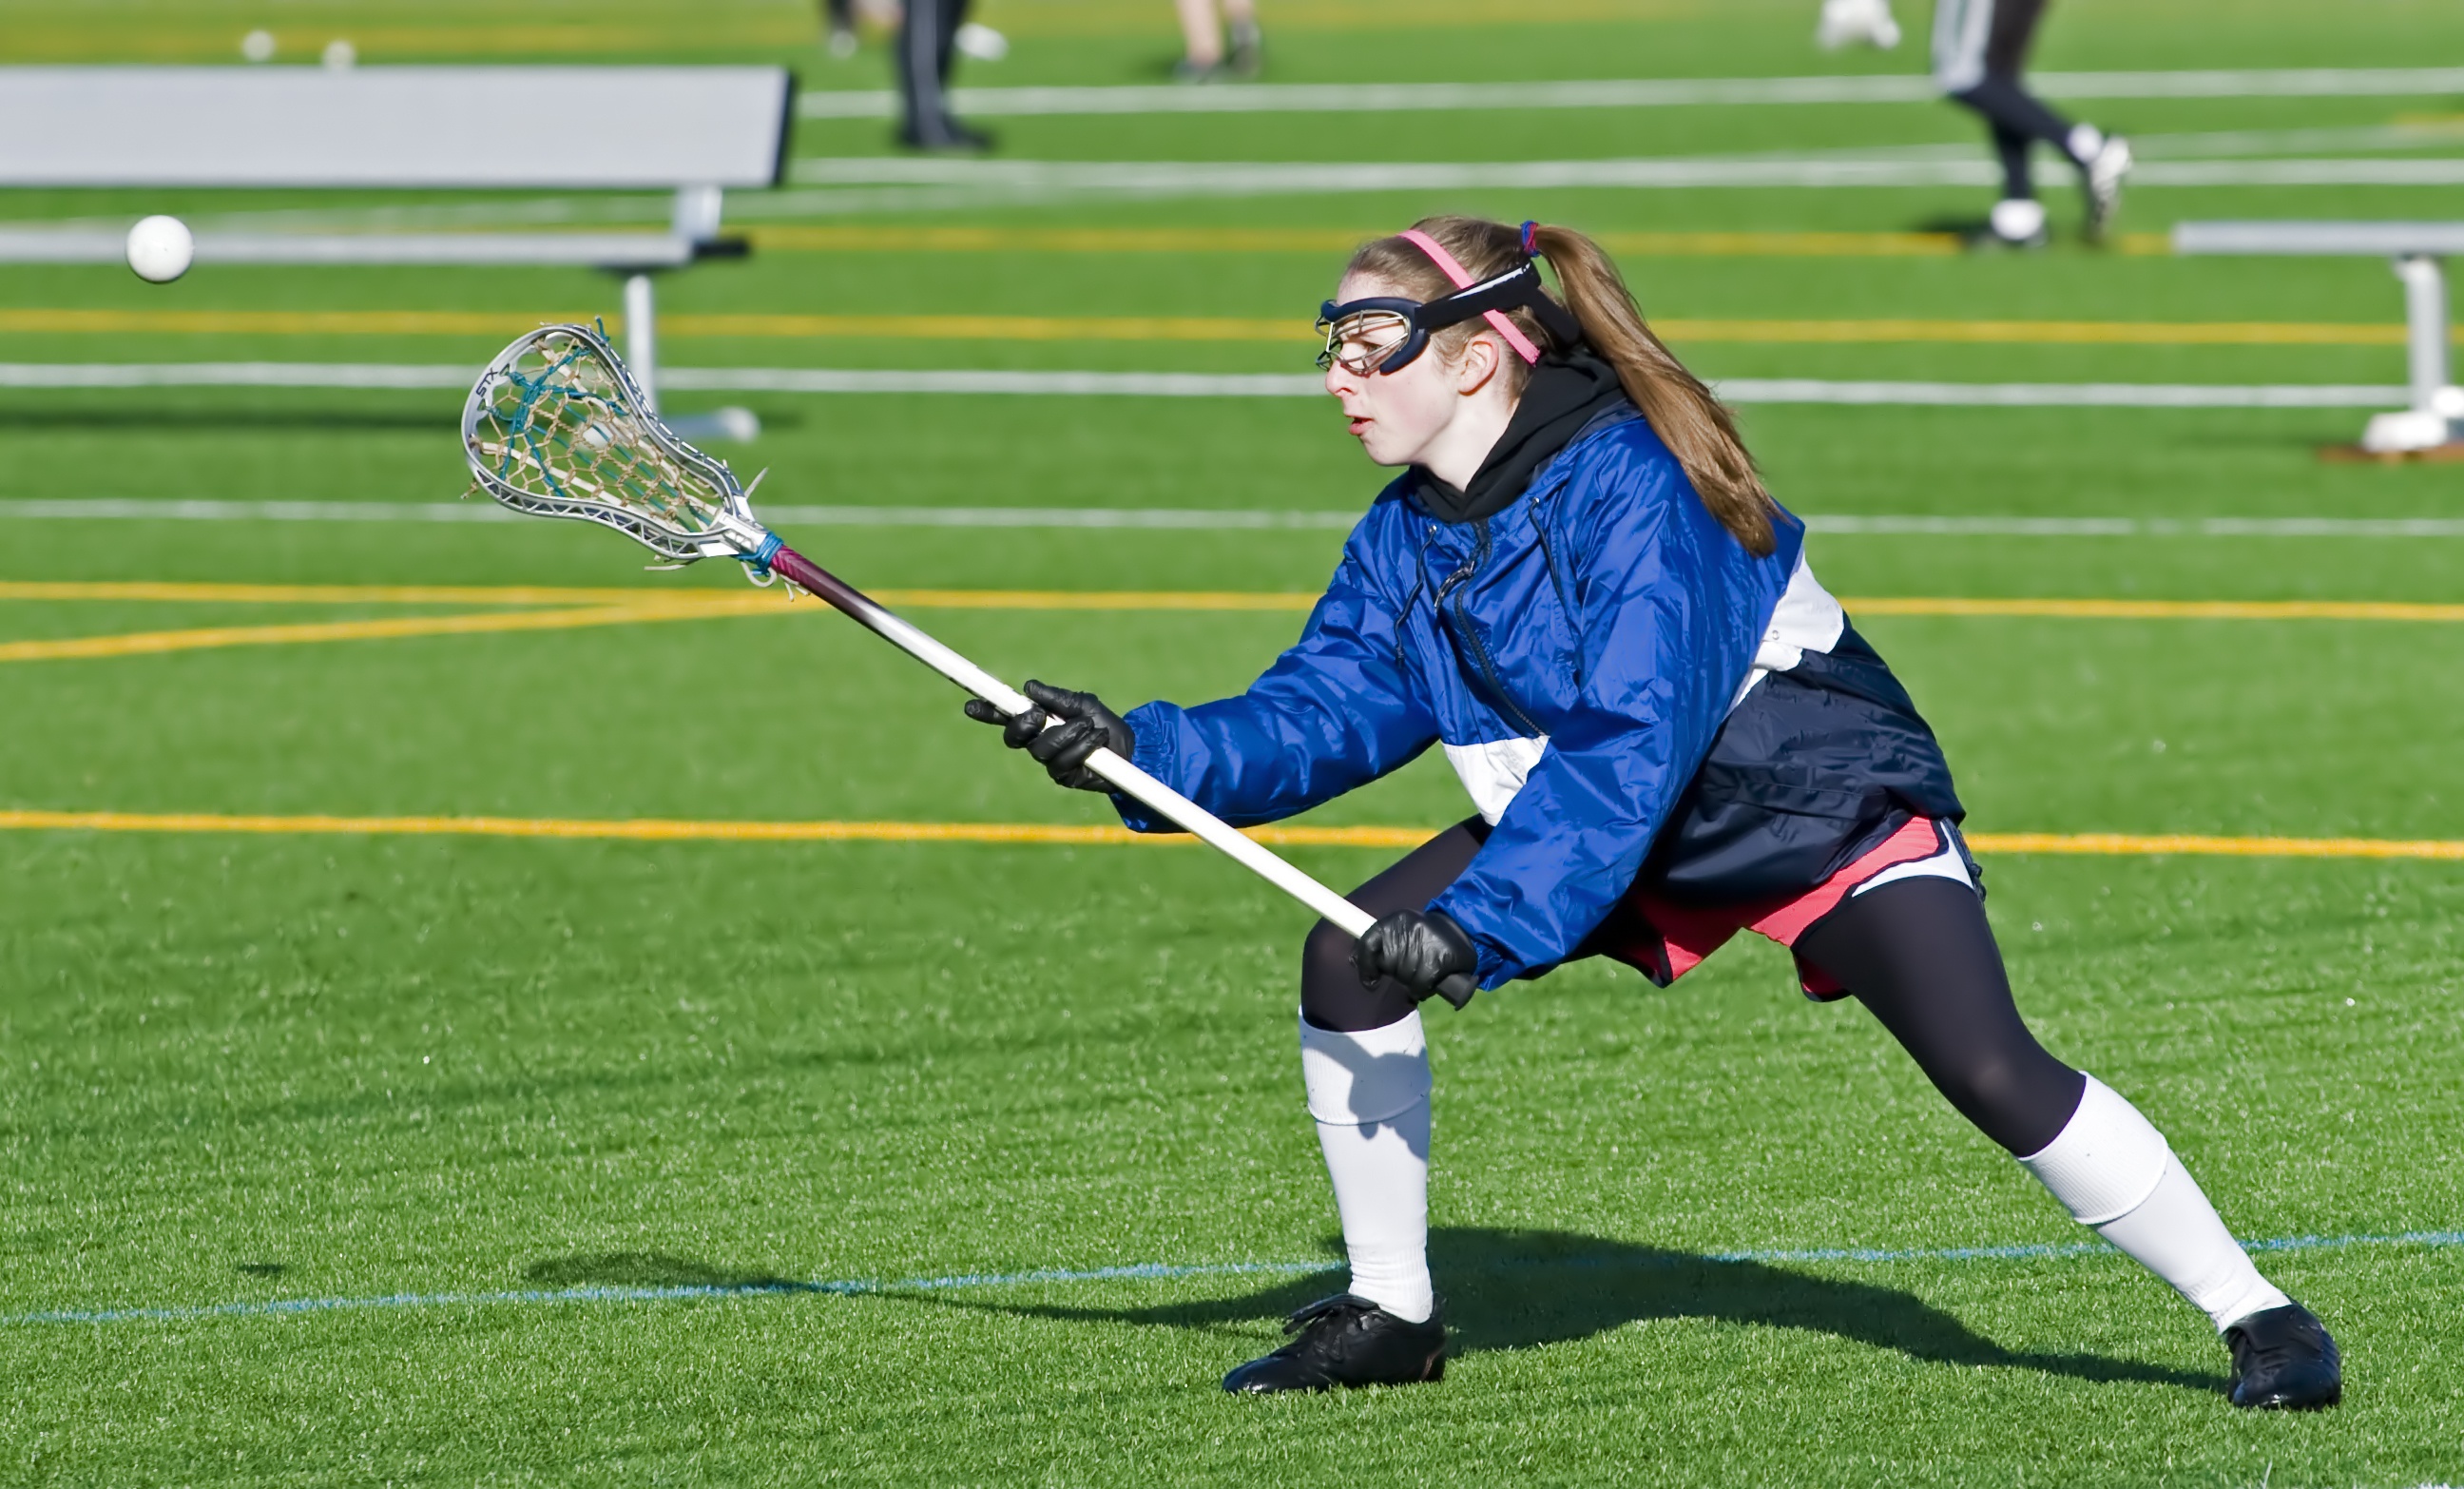 US Women's Lacrosse: Revised Rules for 2016